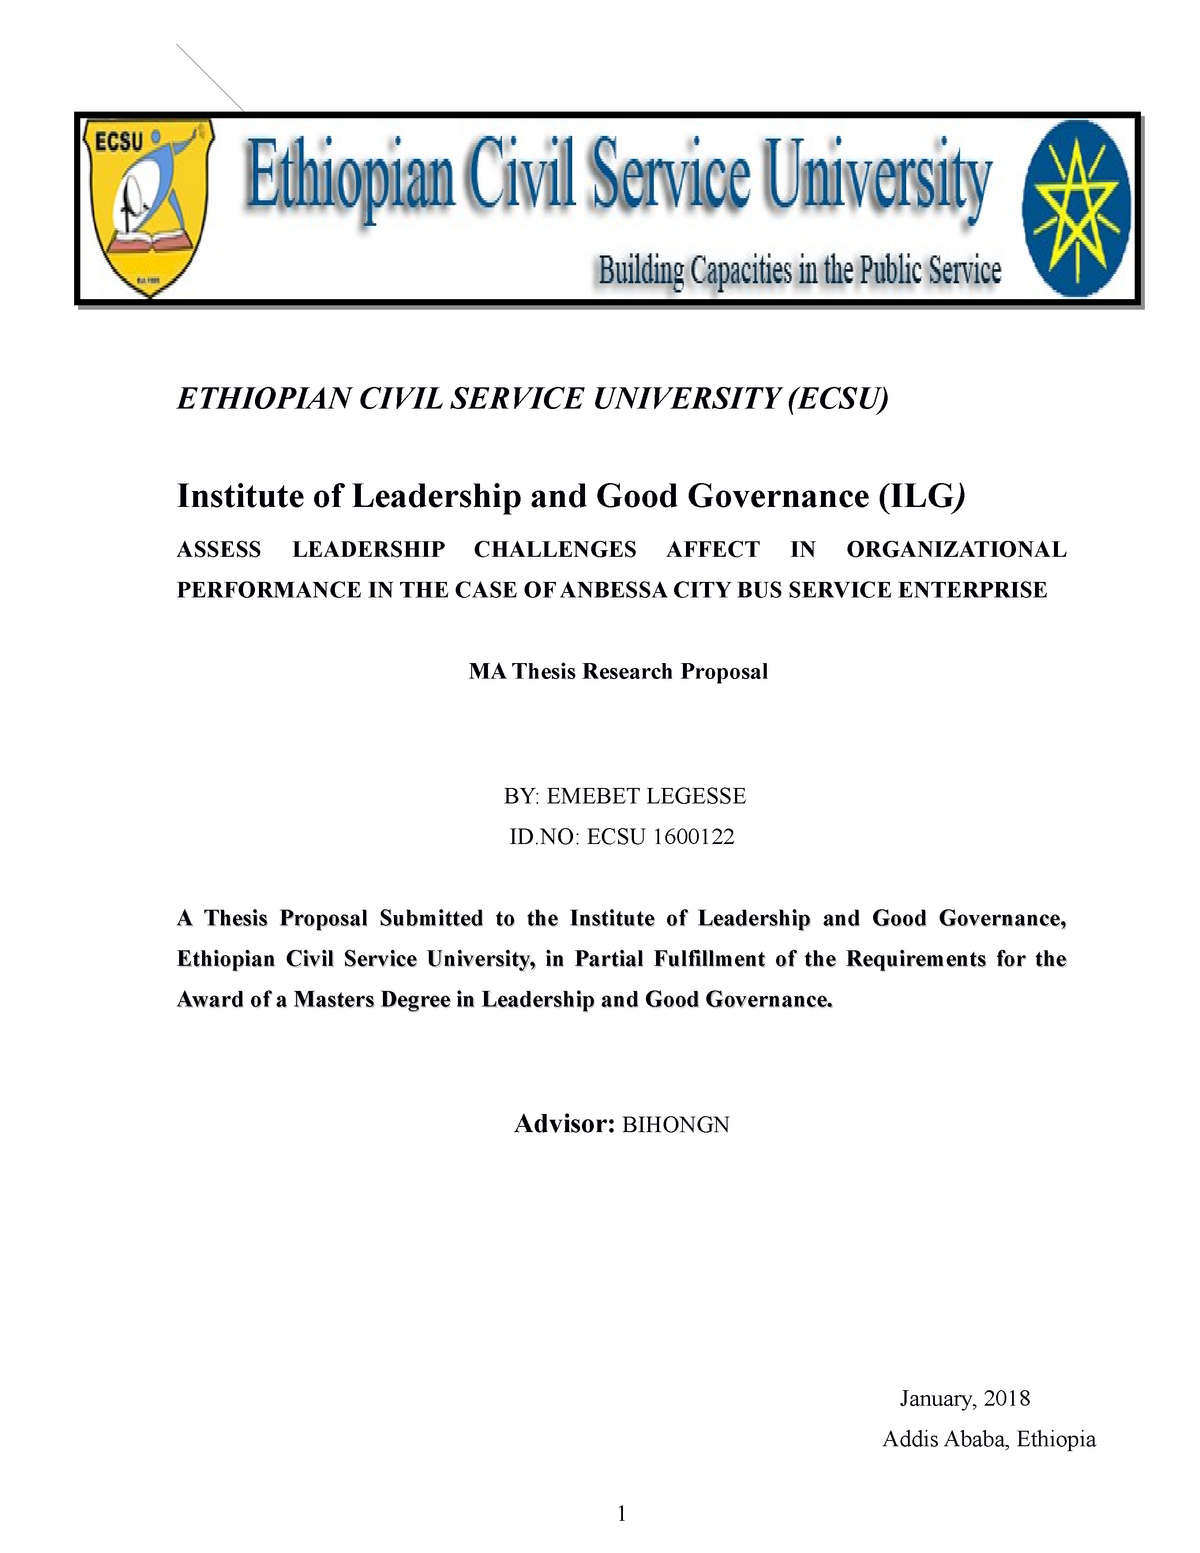 mba research proposal in ethiopia pdf